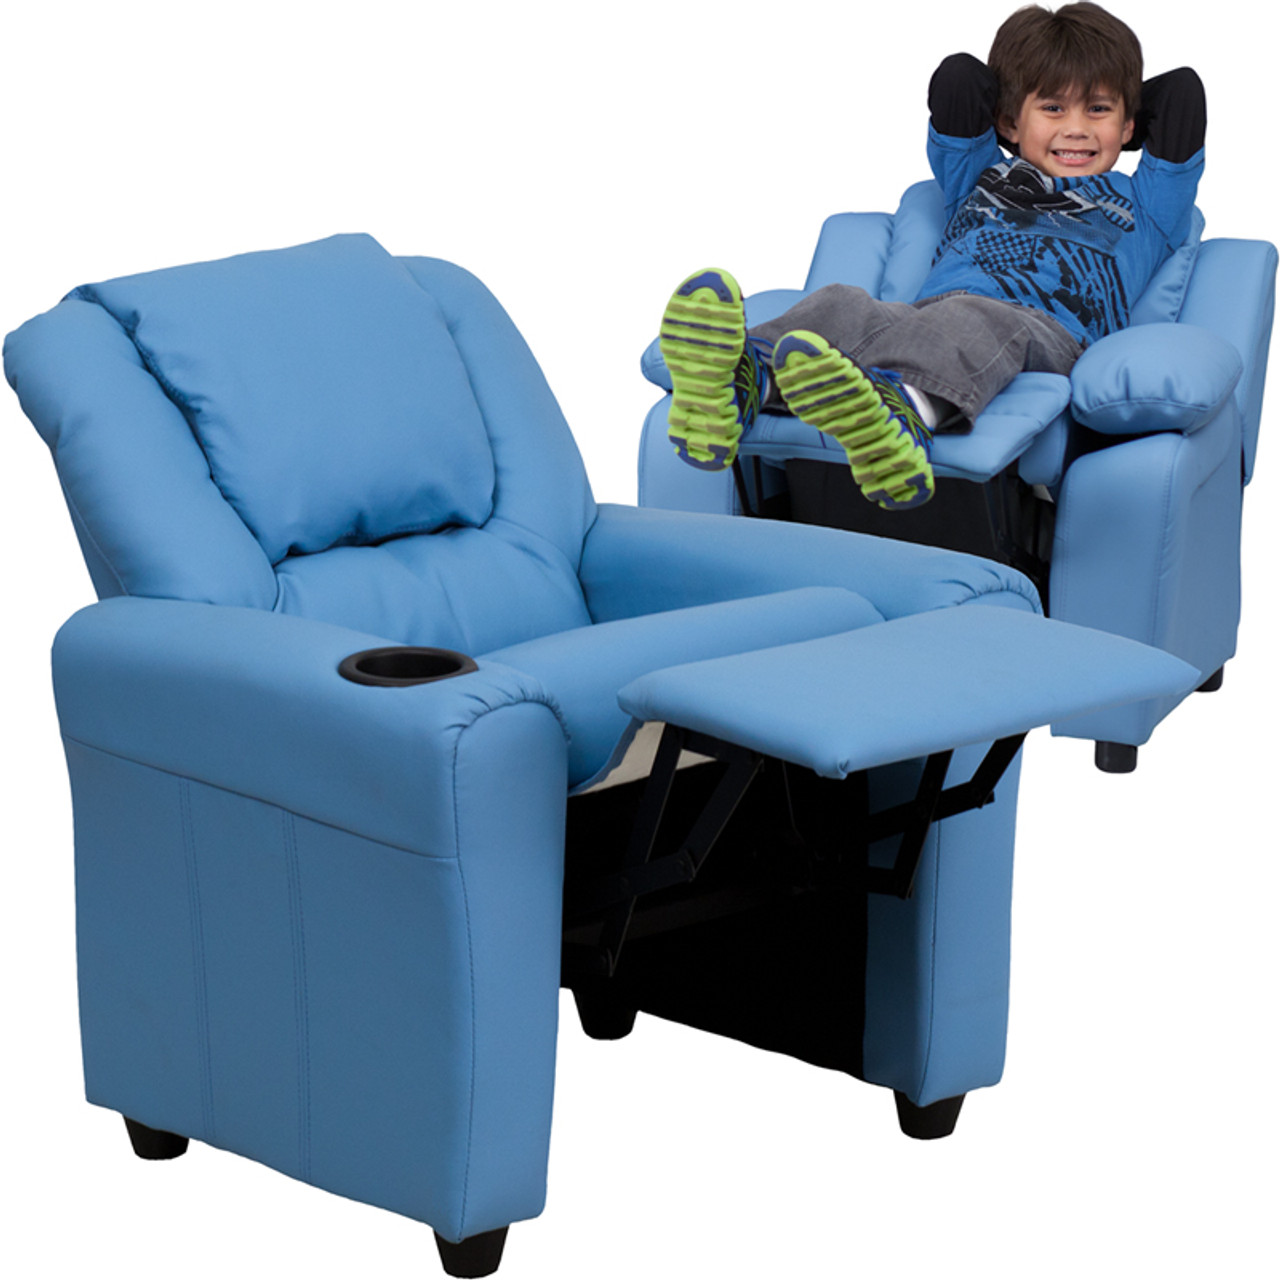 Choosing the Right Child Recliner for Your Home缩略图